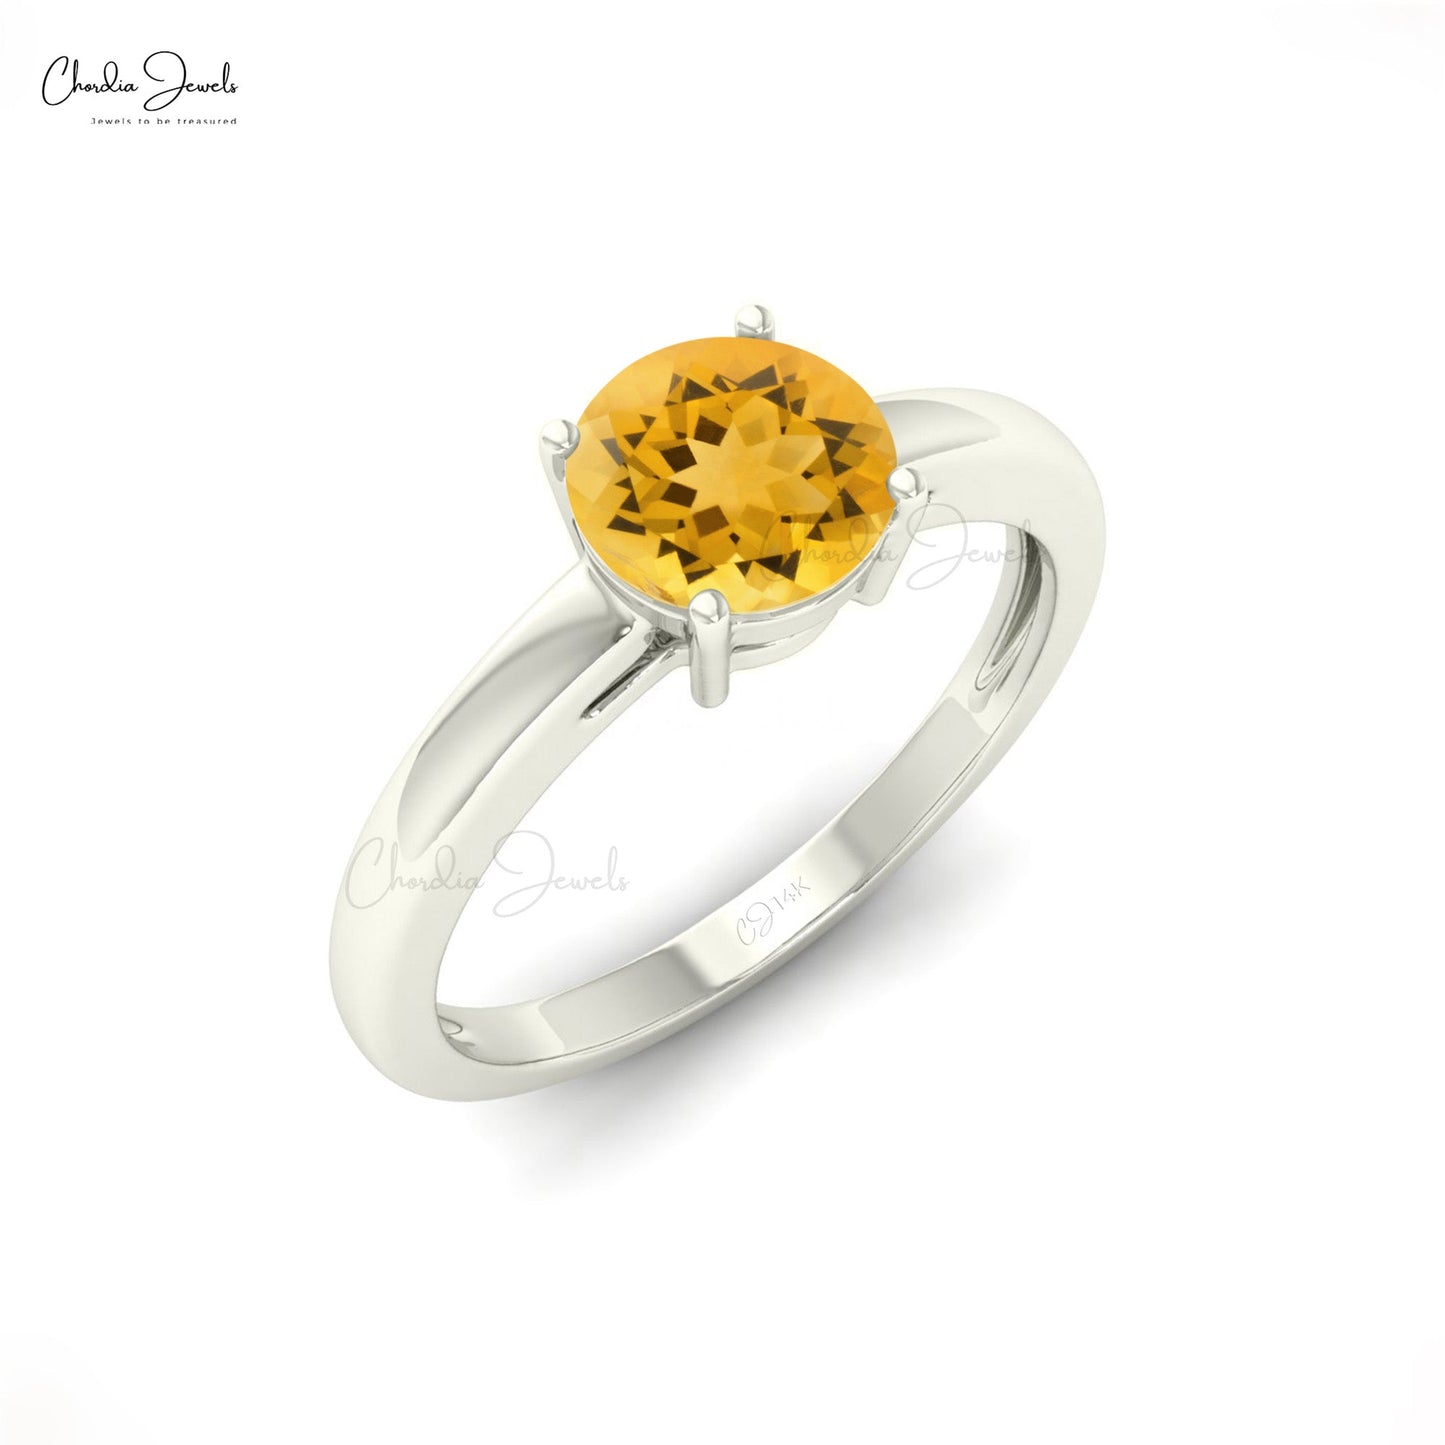 14K Solid Gold Gemstone Anniversary Ring For Her, Natural 0.57 Carats Citrine Solitaire Ring For Women